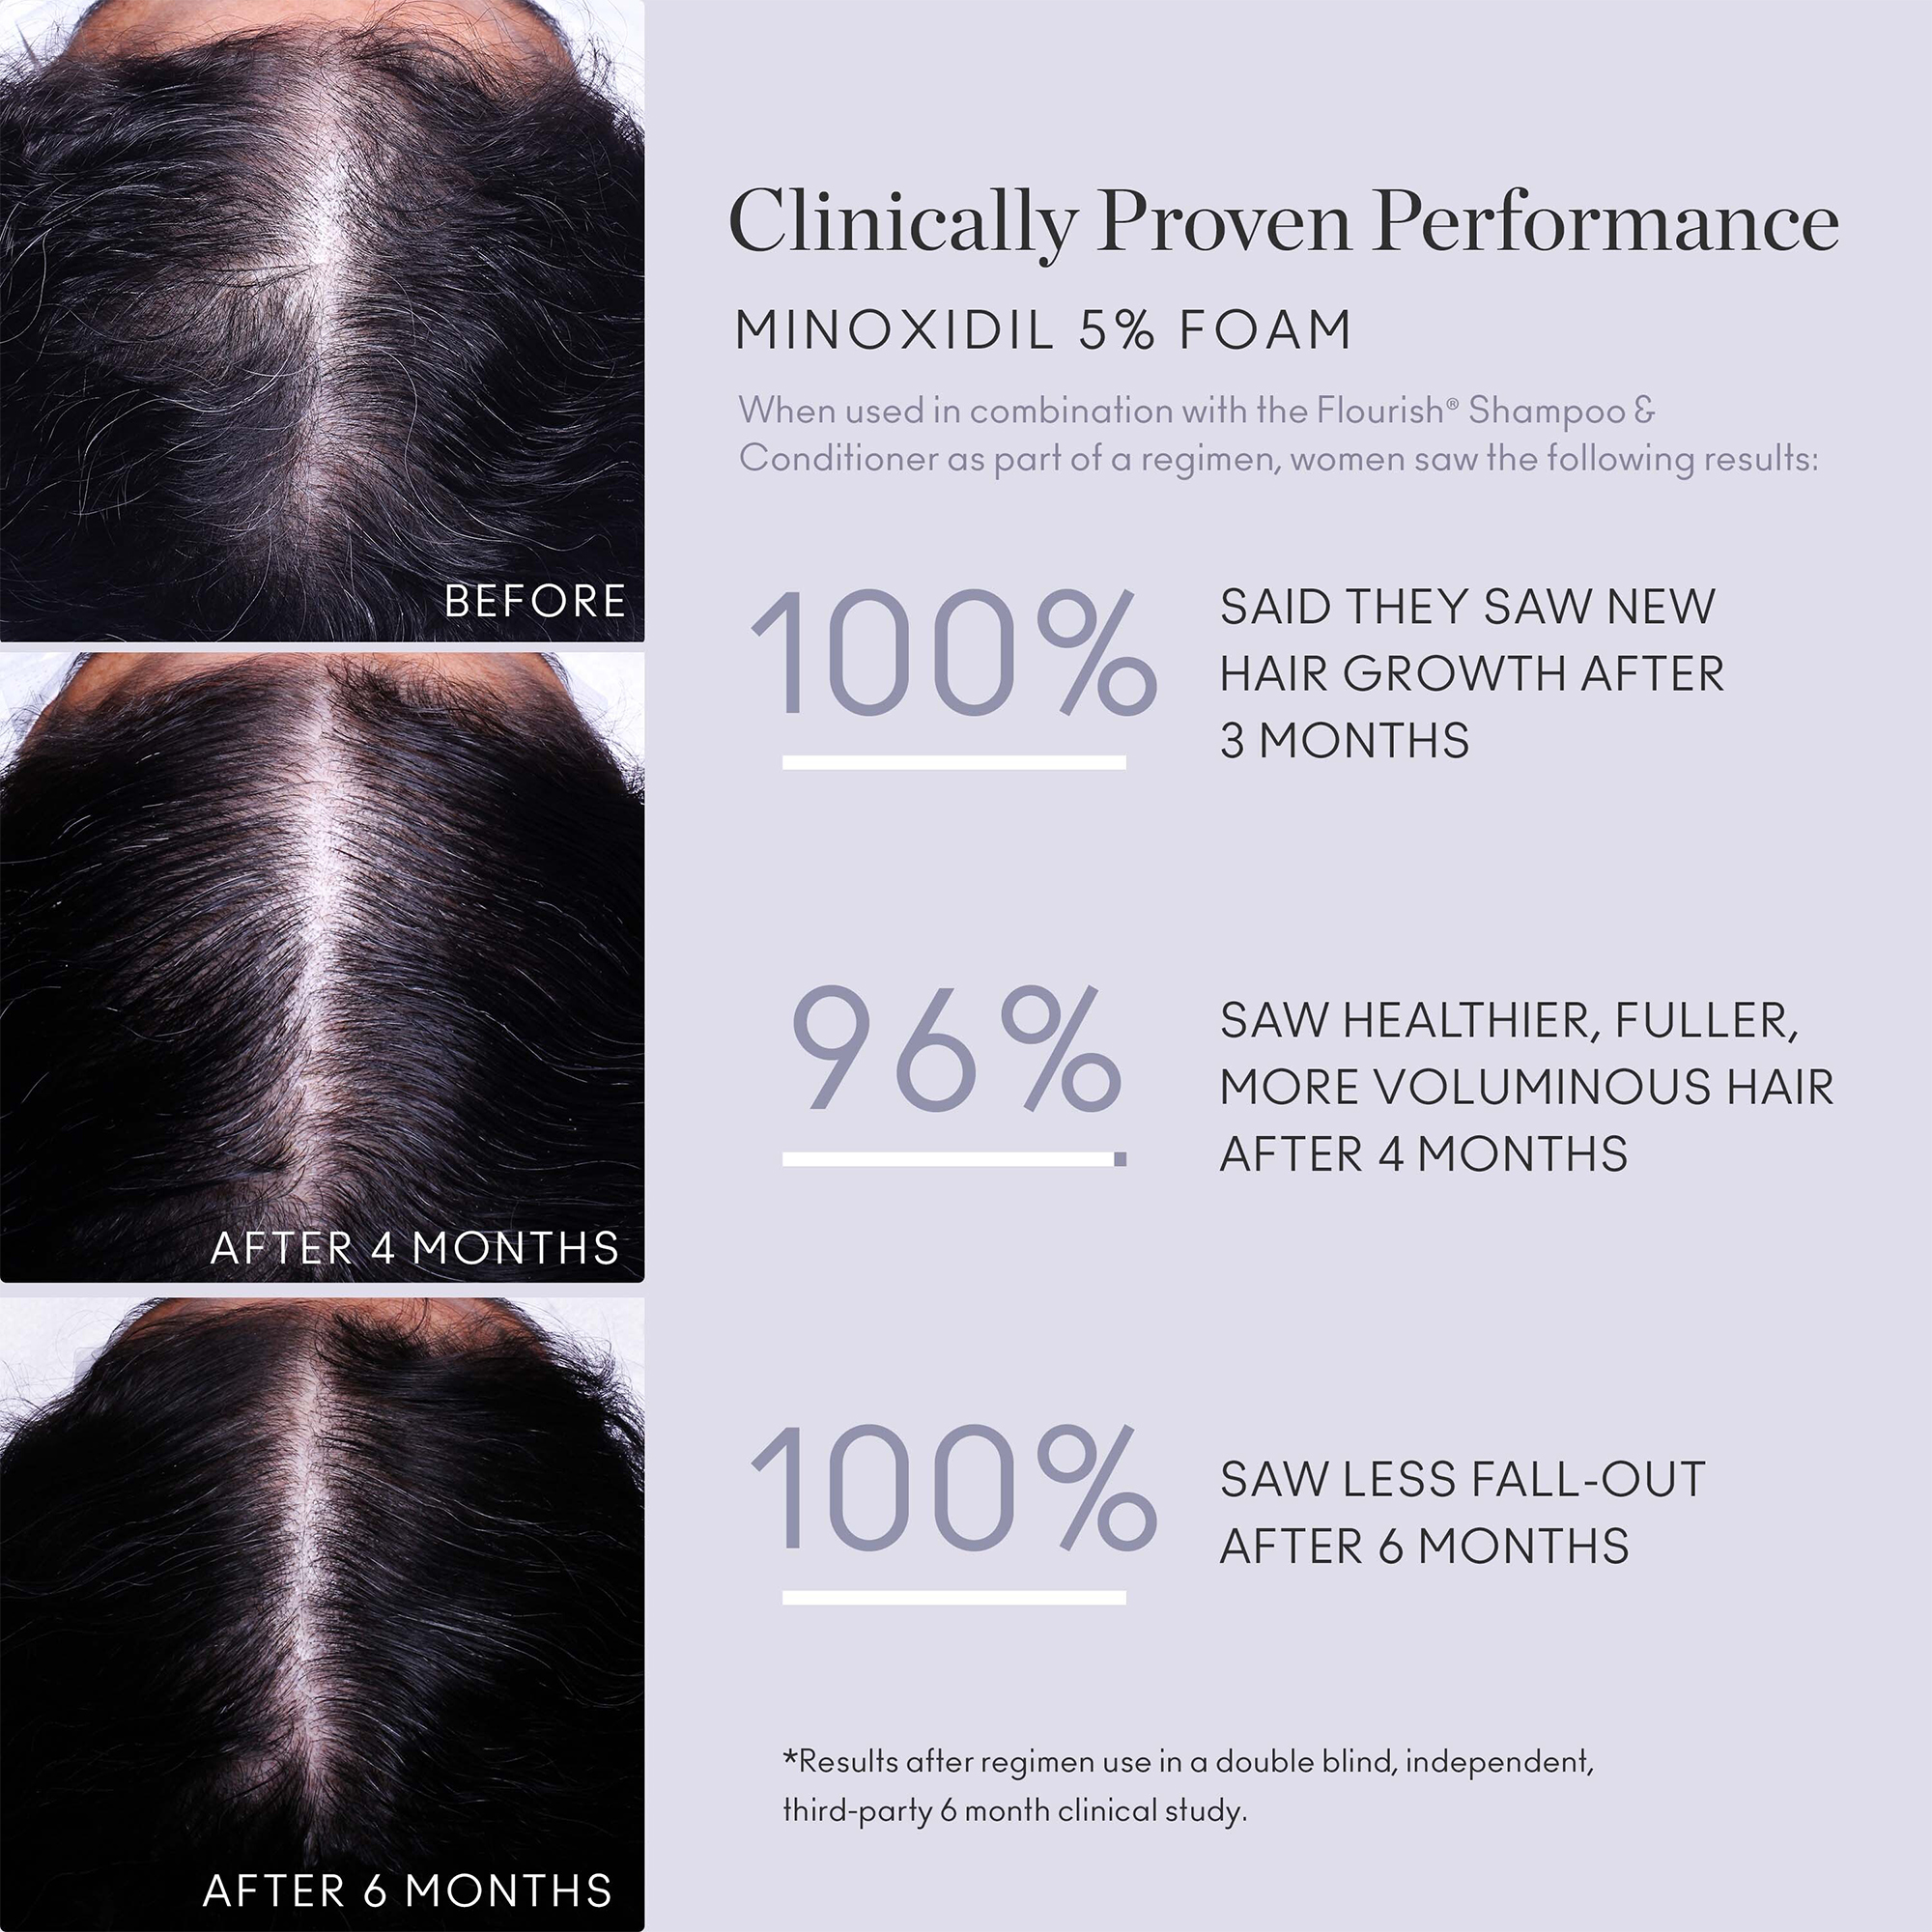 Clinically proven performance